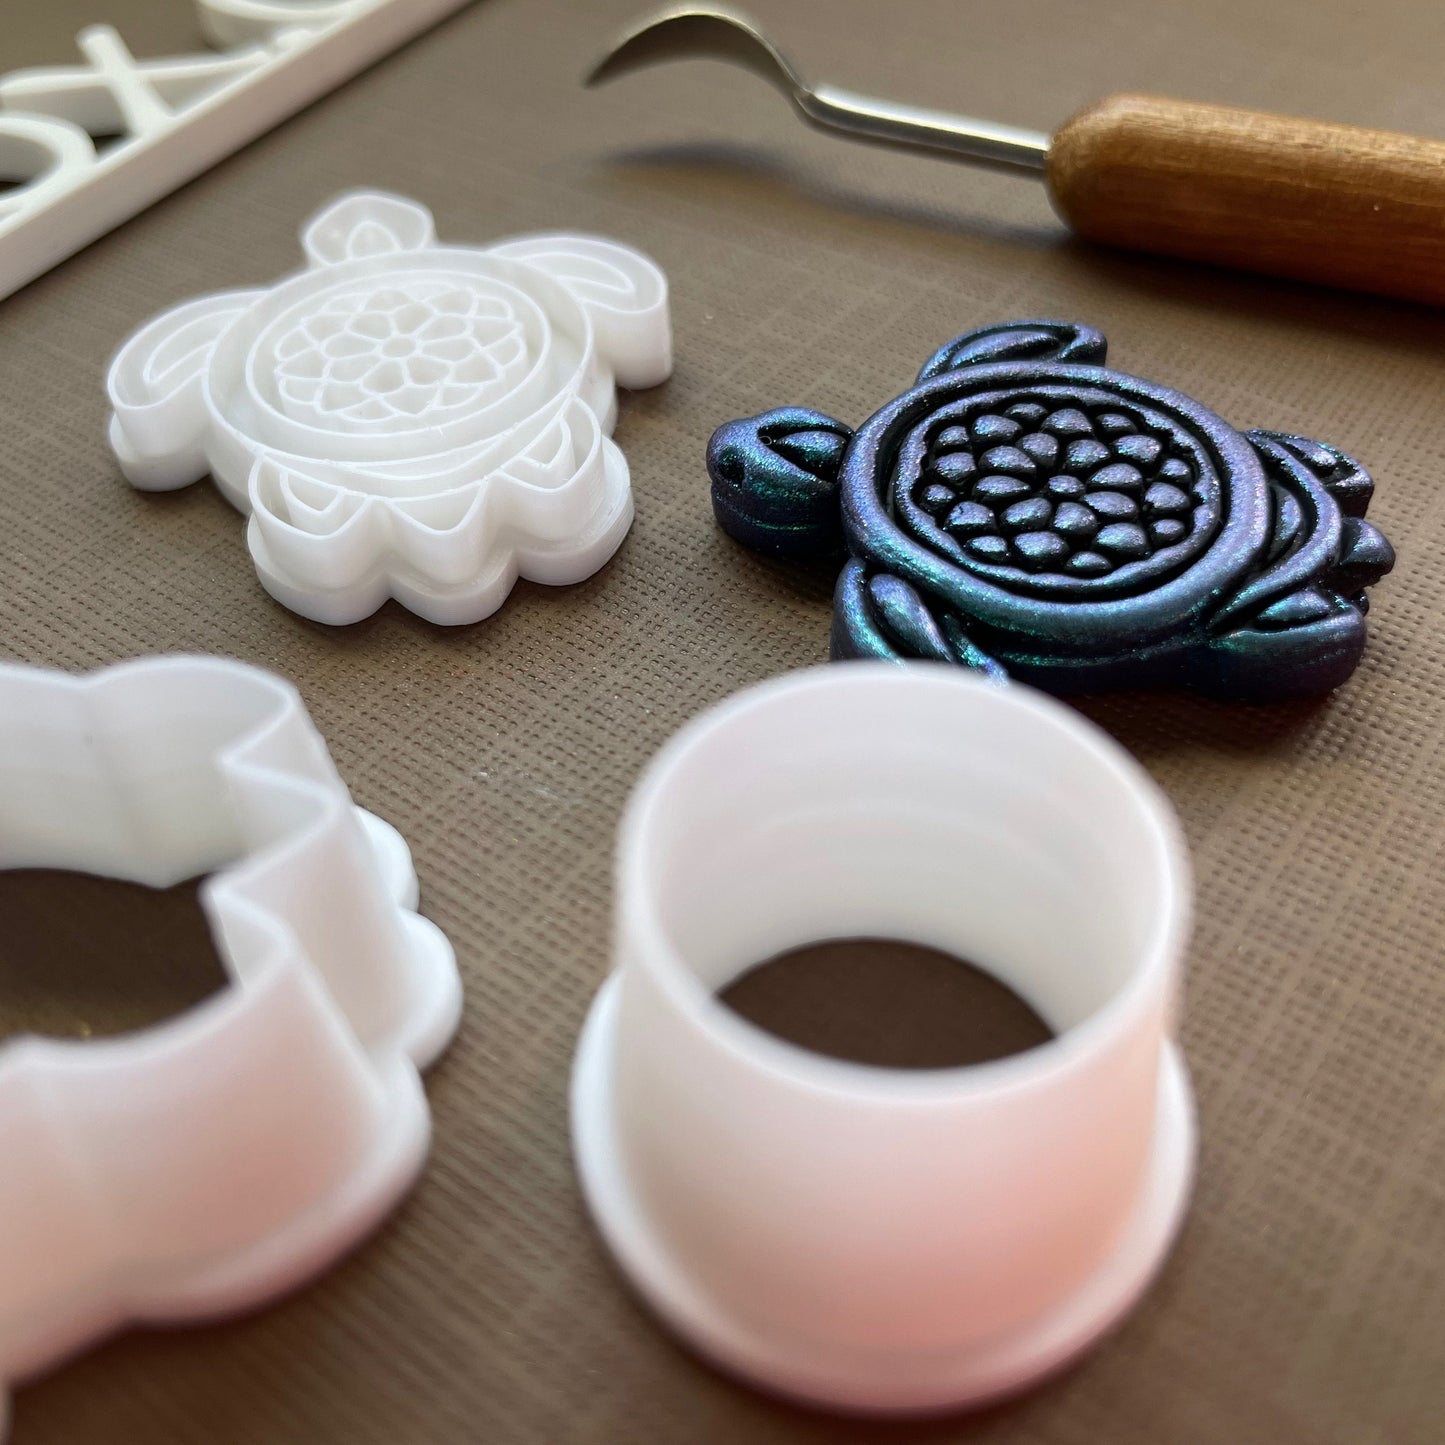 Mandala turtle stamp and cutter set - made for use with polymer clay